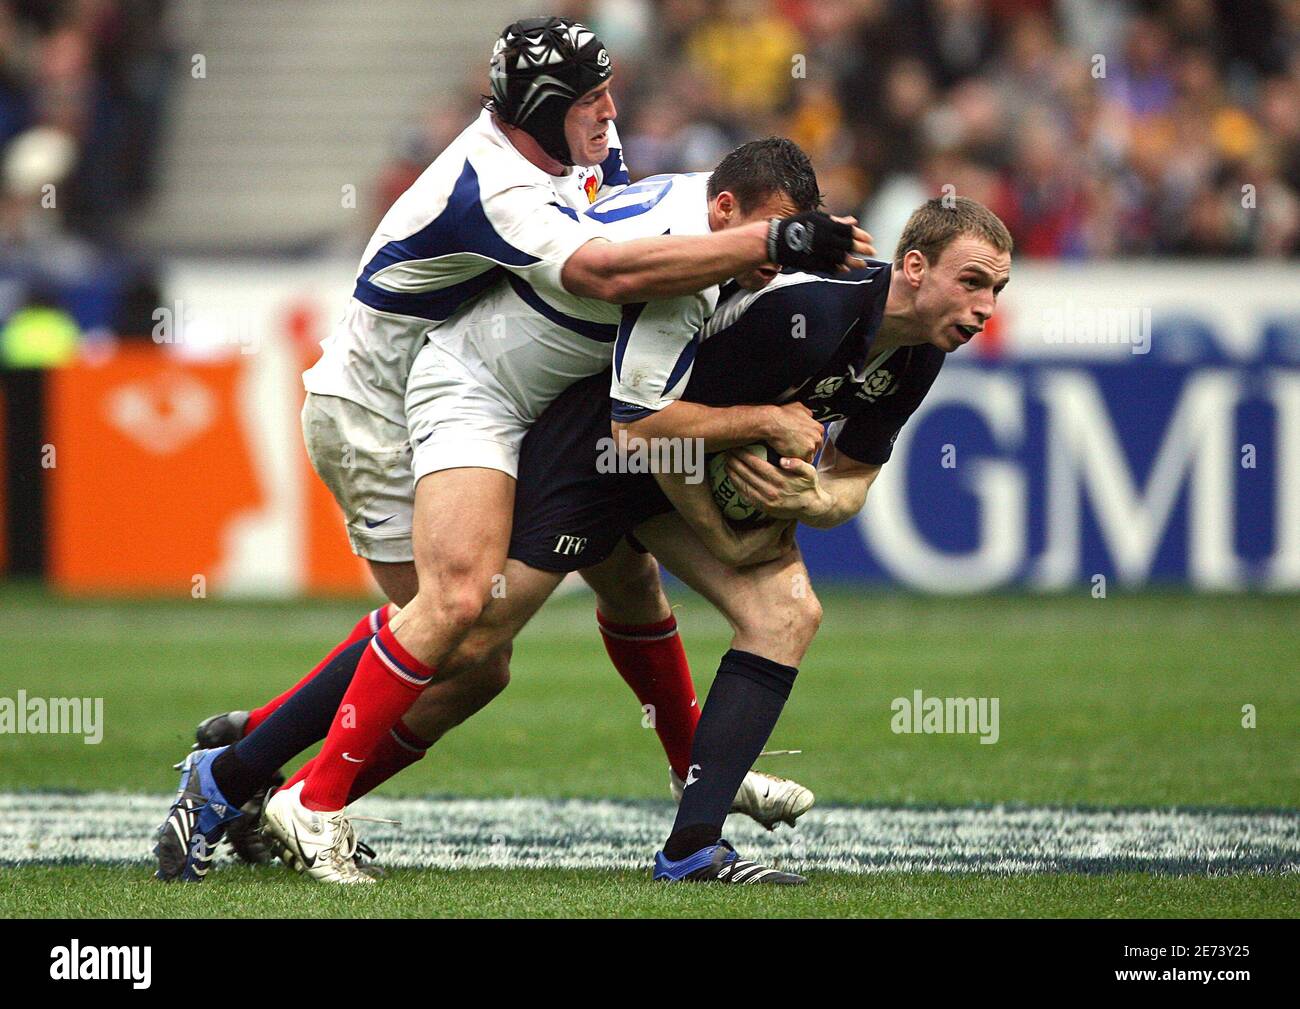 Scotland's Andrew Henderson during the Rugby Union RBS 6 nations tournament match France vs Scotland at the Stade de France in Saint-Denis, north of Paris, France, on March 17, 2007. France won 46-19. Photo by Mehdi Taamallah/Cameleon/ABACAPRESS.COM Stock Photo